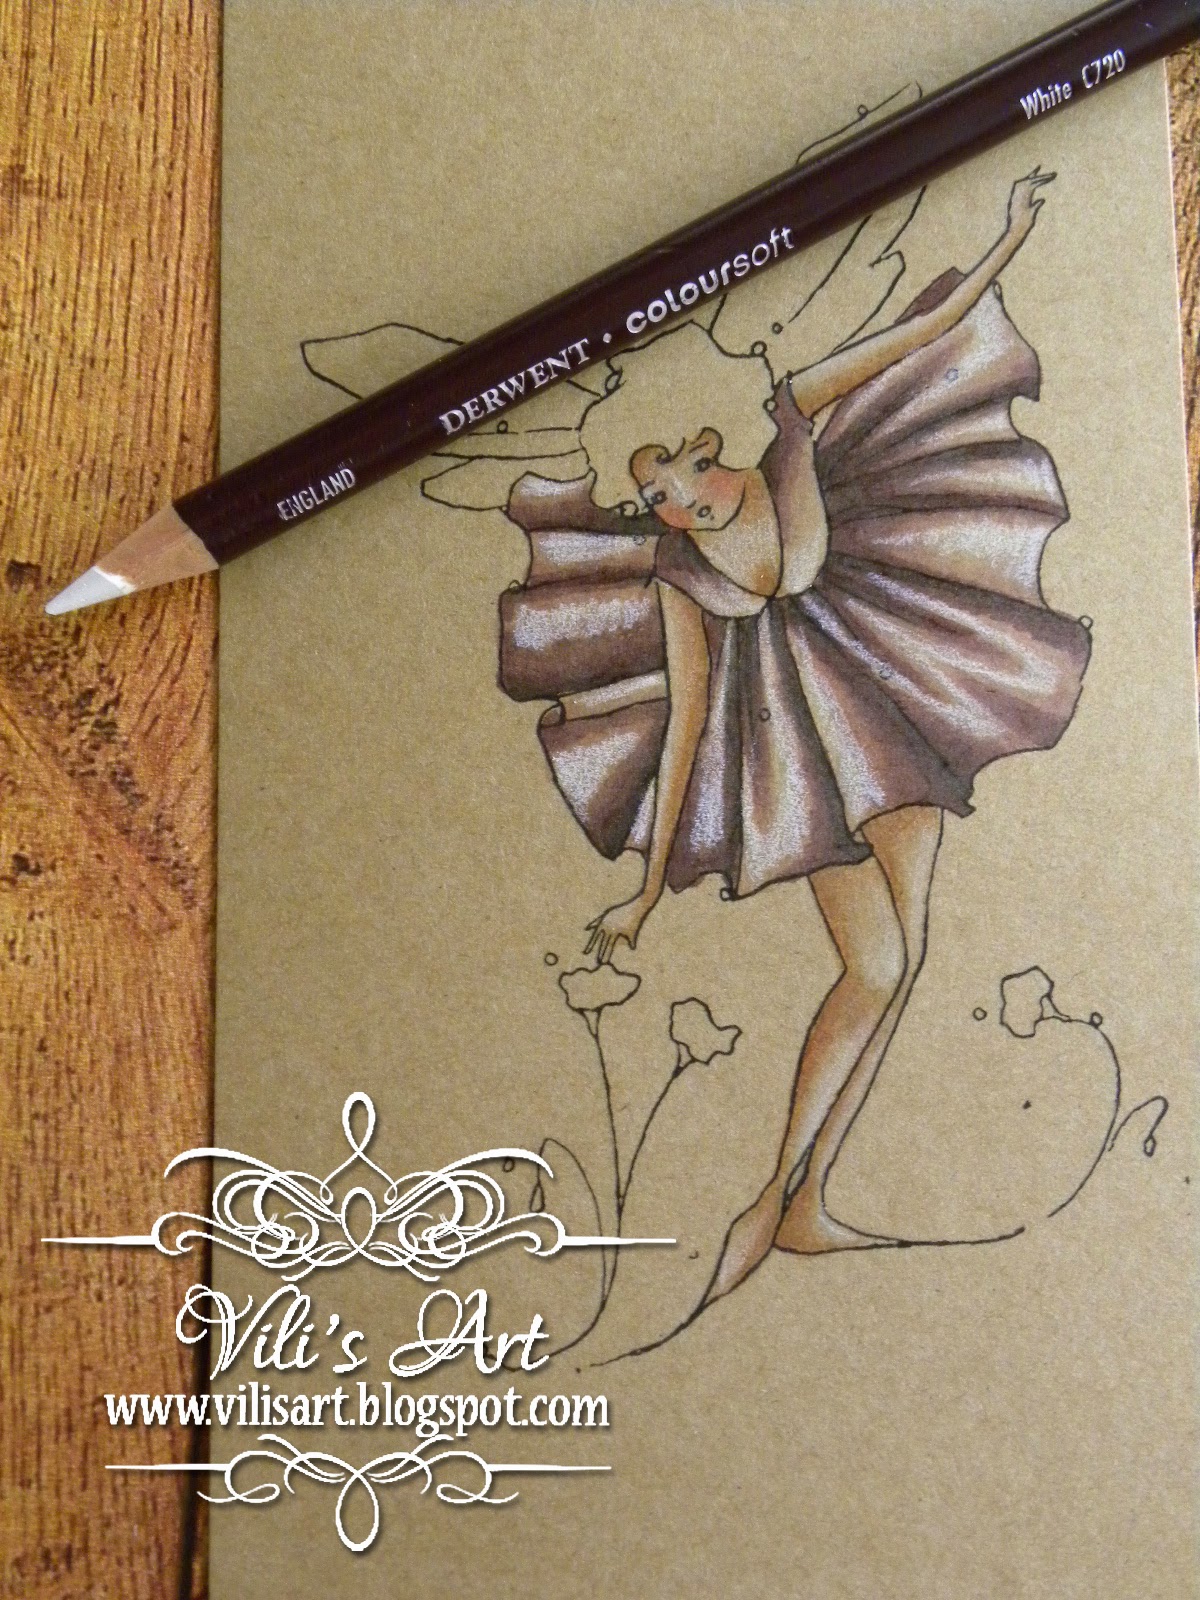 Pencil colouring on kraft paper